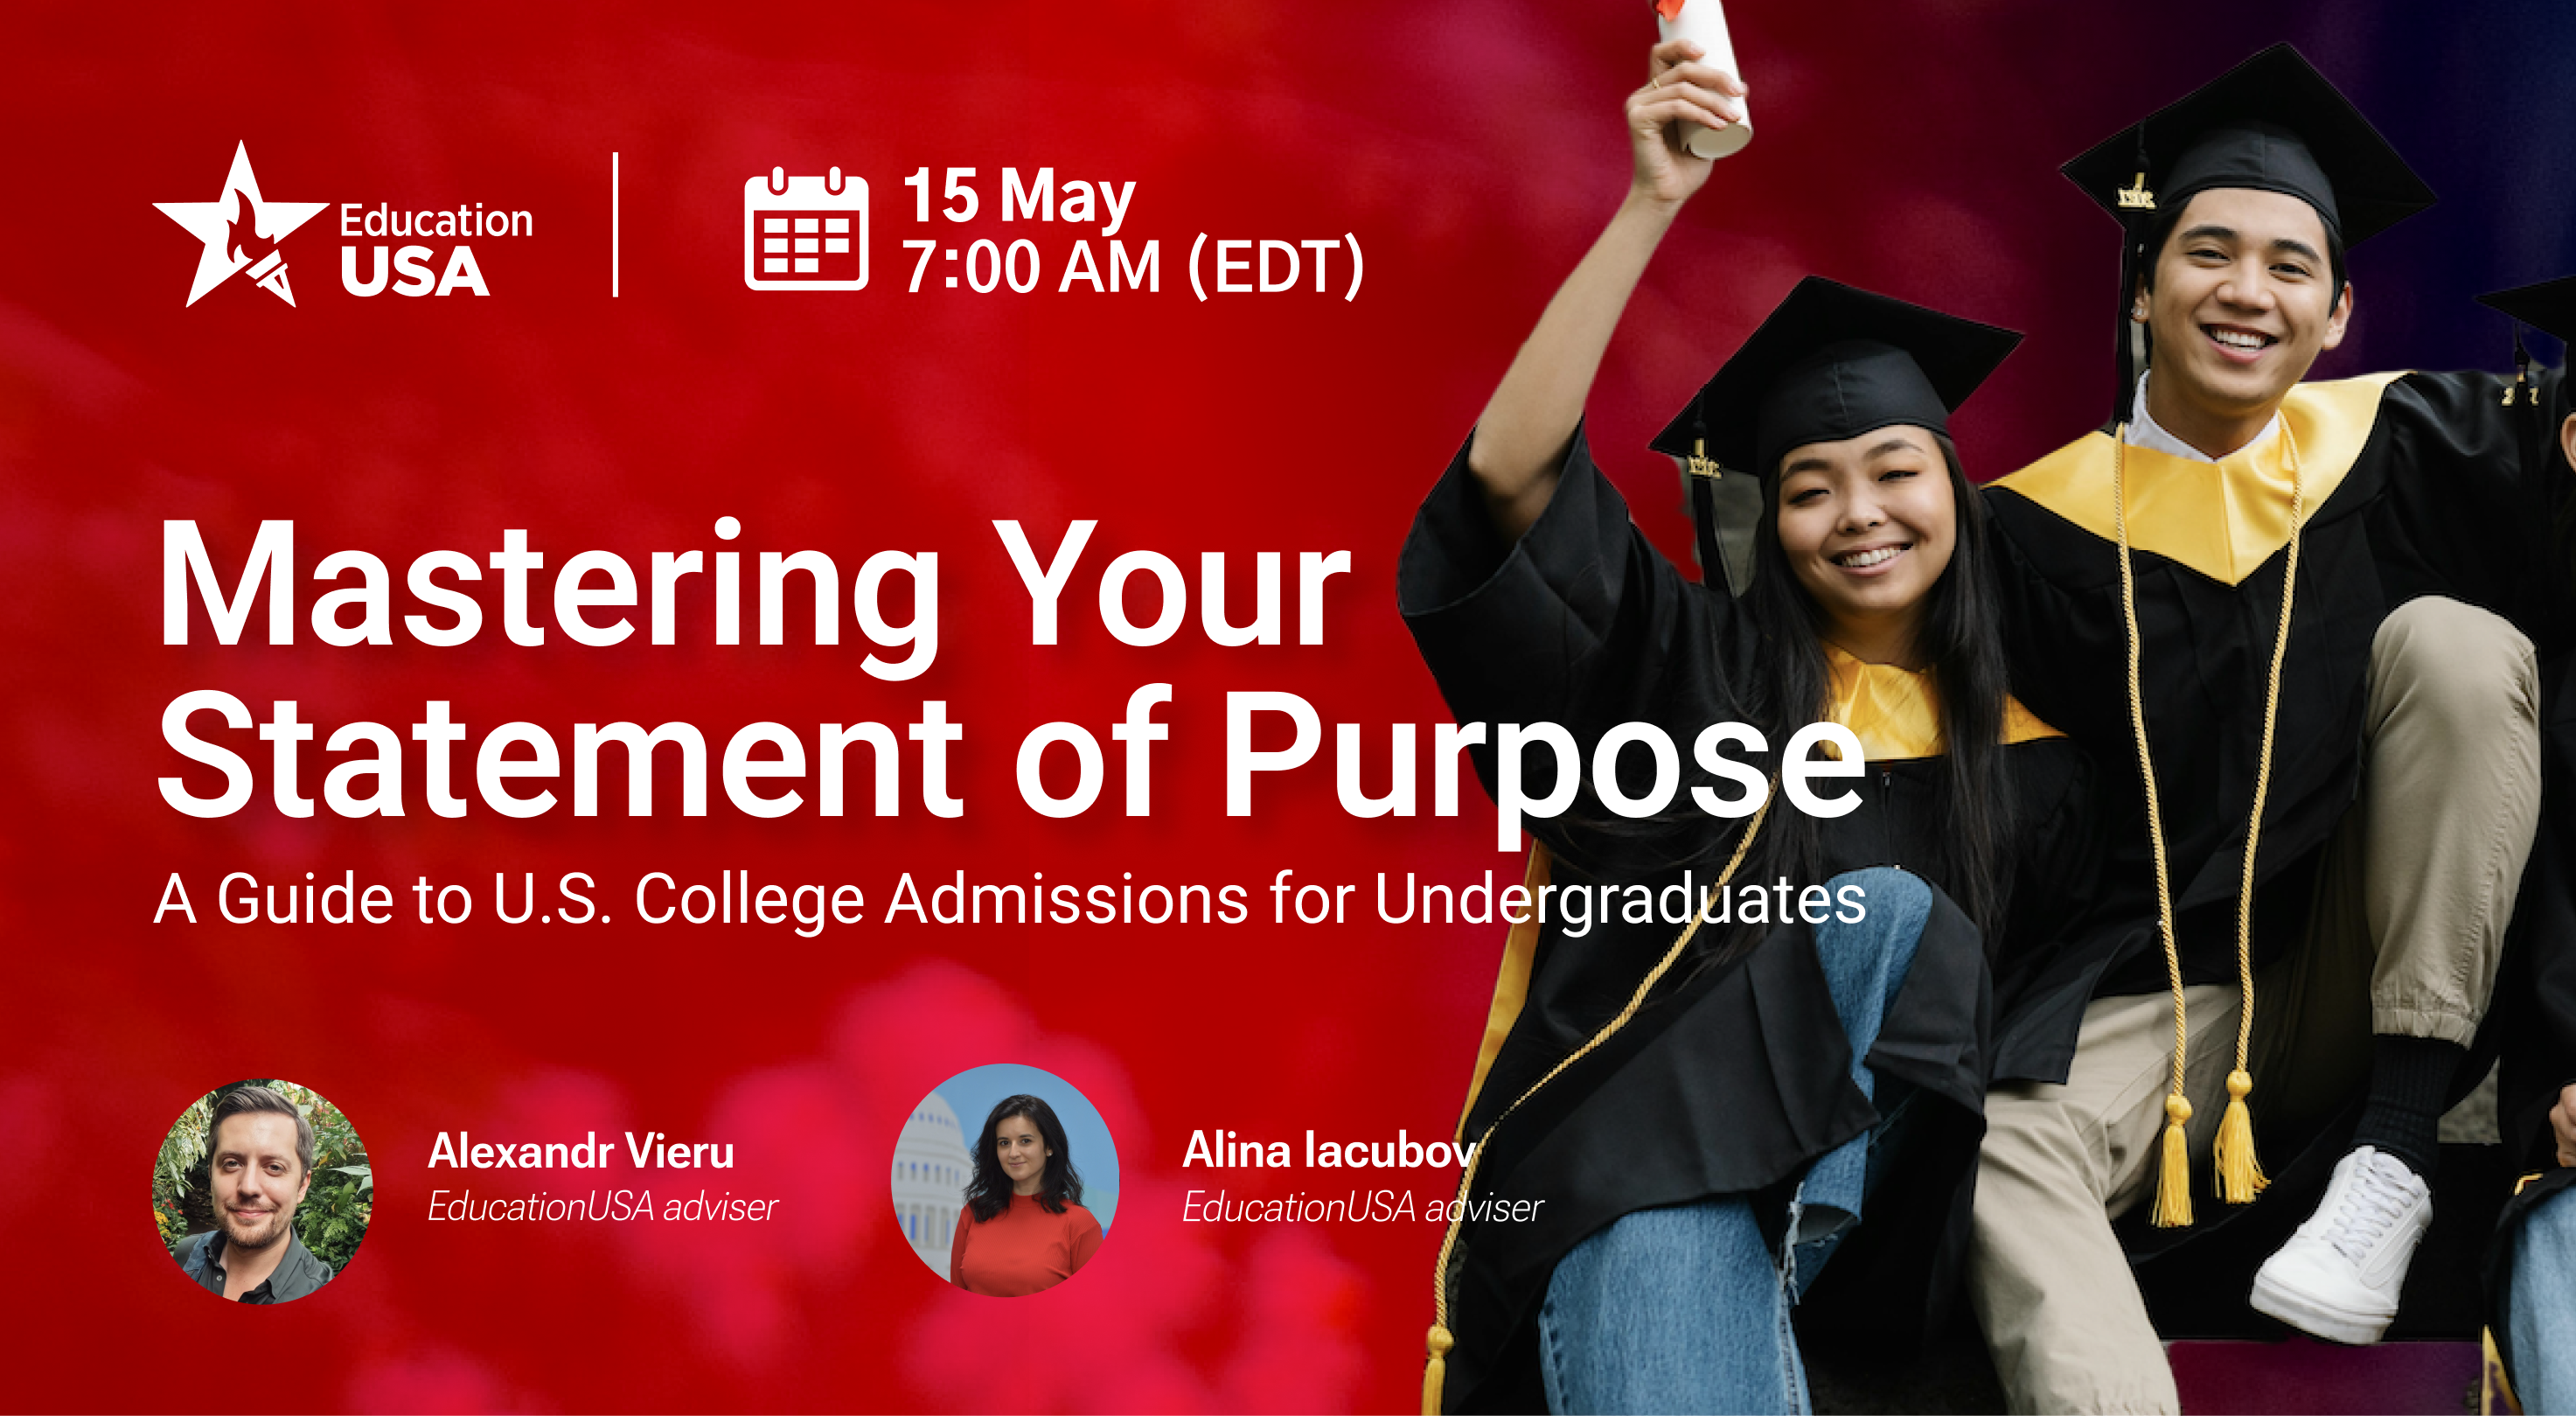 Mastering Your Statement of Purpose: A Guide to U.S. College Admissions for Undergraduates